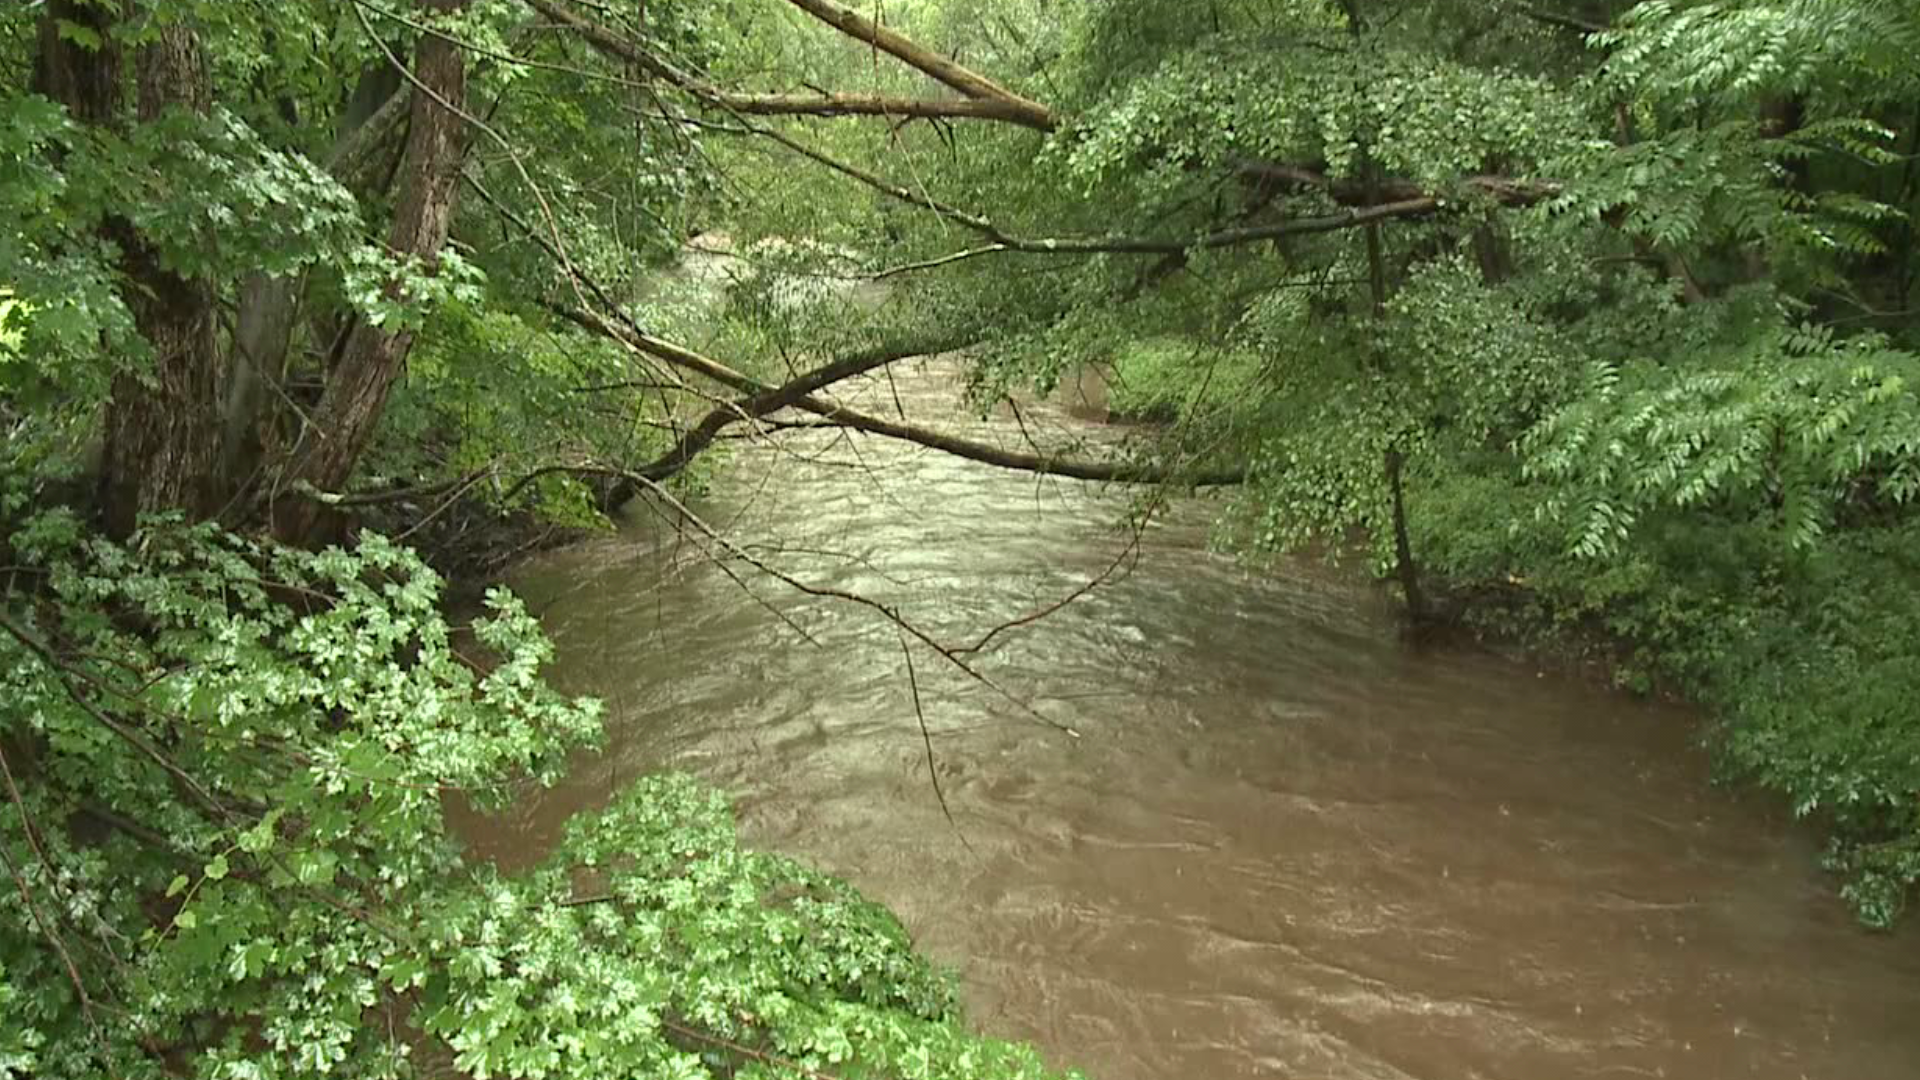 Parts of Schuylkill County that got hit hard back in June were on alert as the remnants of Tropical Storm Isaias hit our area.